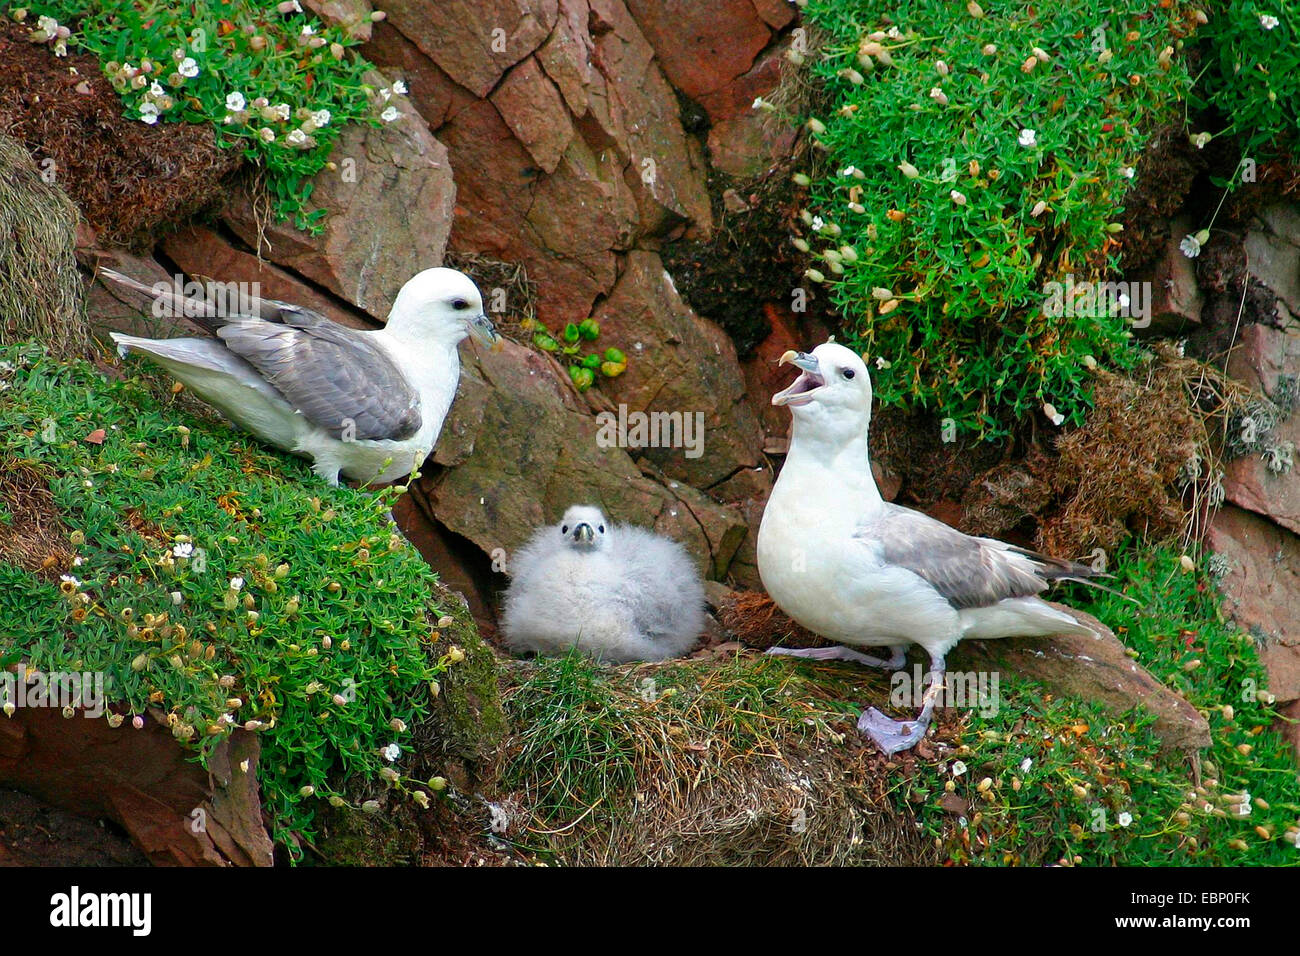 northern fulmar (Fulmarus glacialis), breeding pair of northern fulmars at the nest with chicken, one of the adults threatening, United Kingdom, Scotland, Shetland Islands, Fair Isle Stock Photo